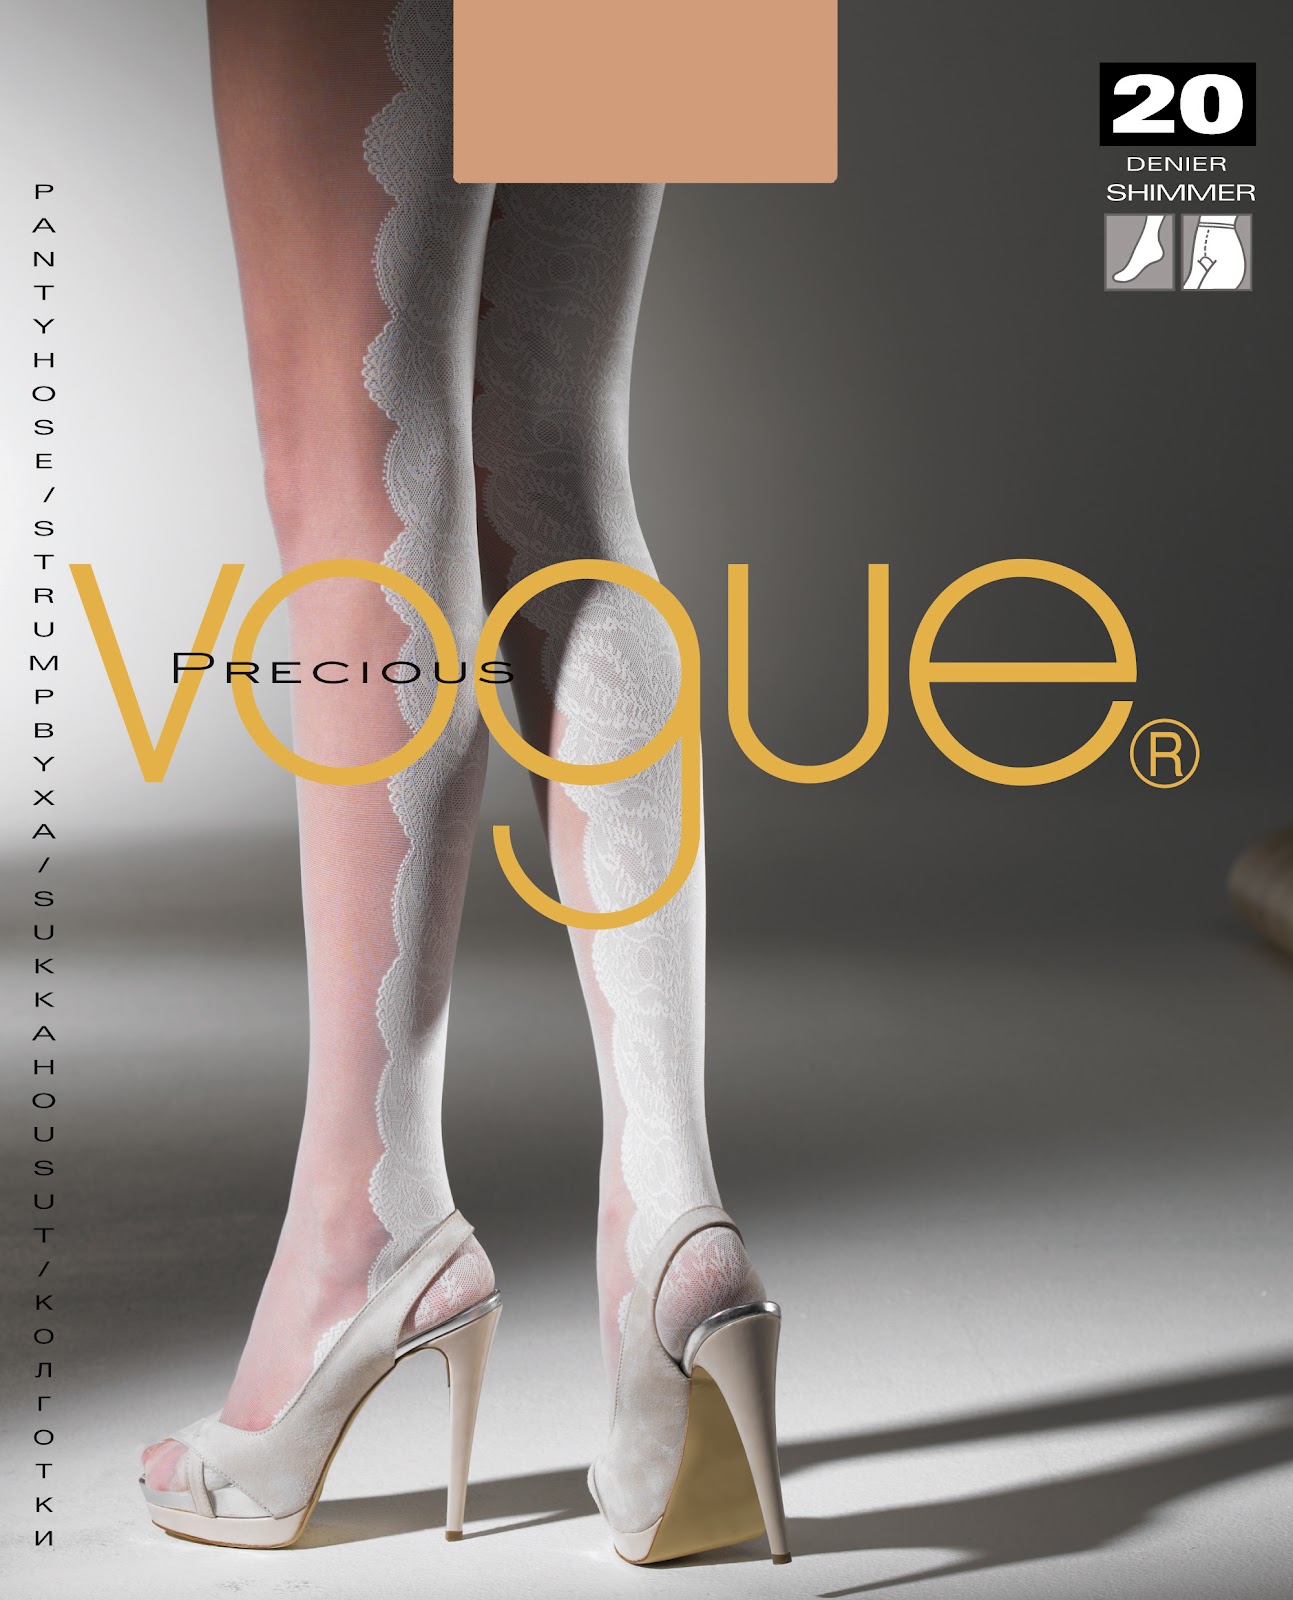 Pantyhose Library: Vogue Hosiery Spring Summer 2012 Catalog & Packaging